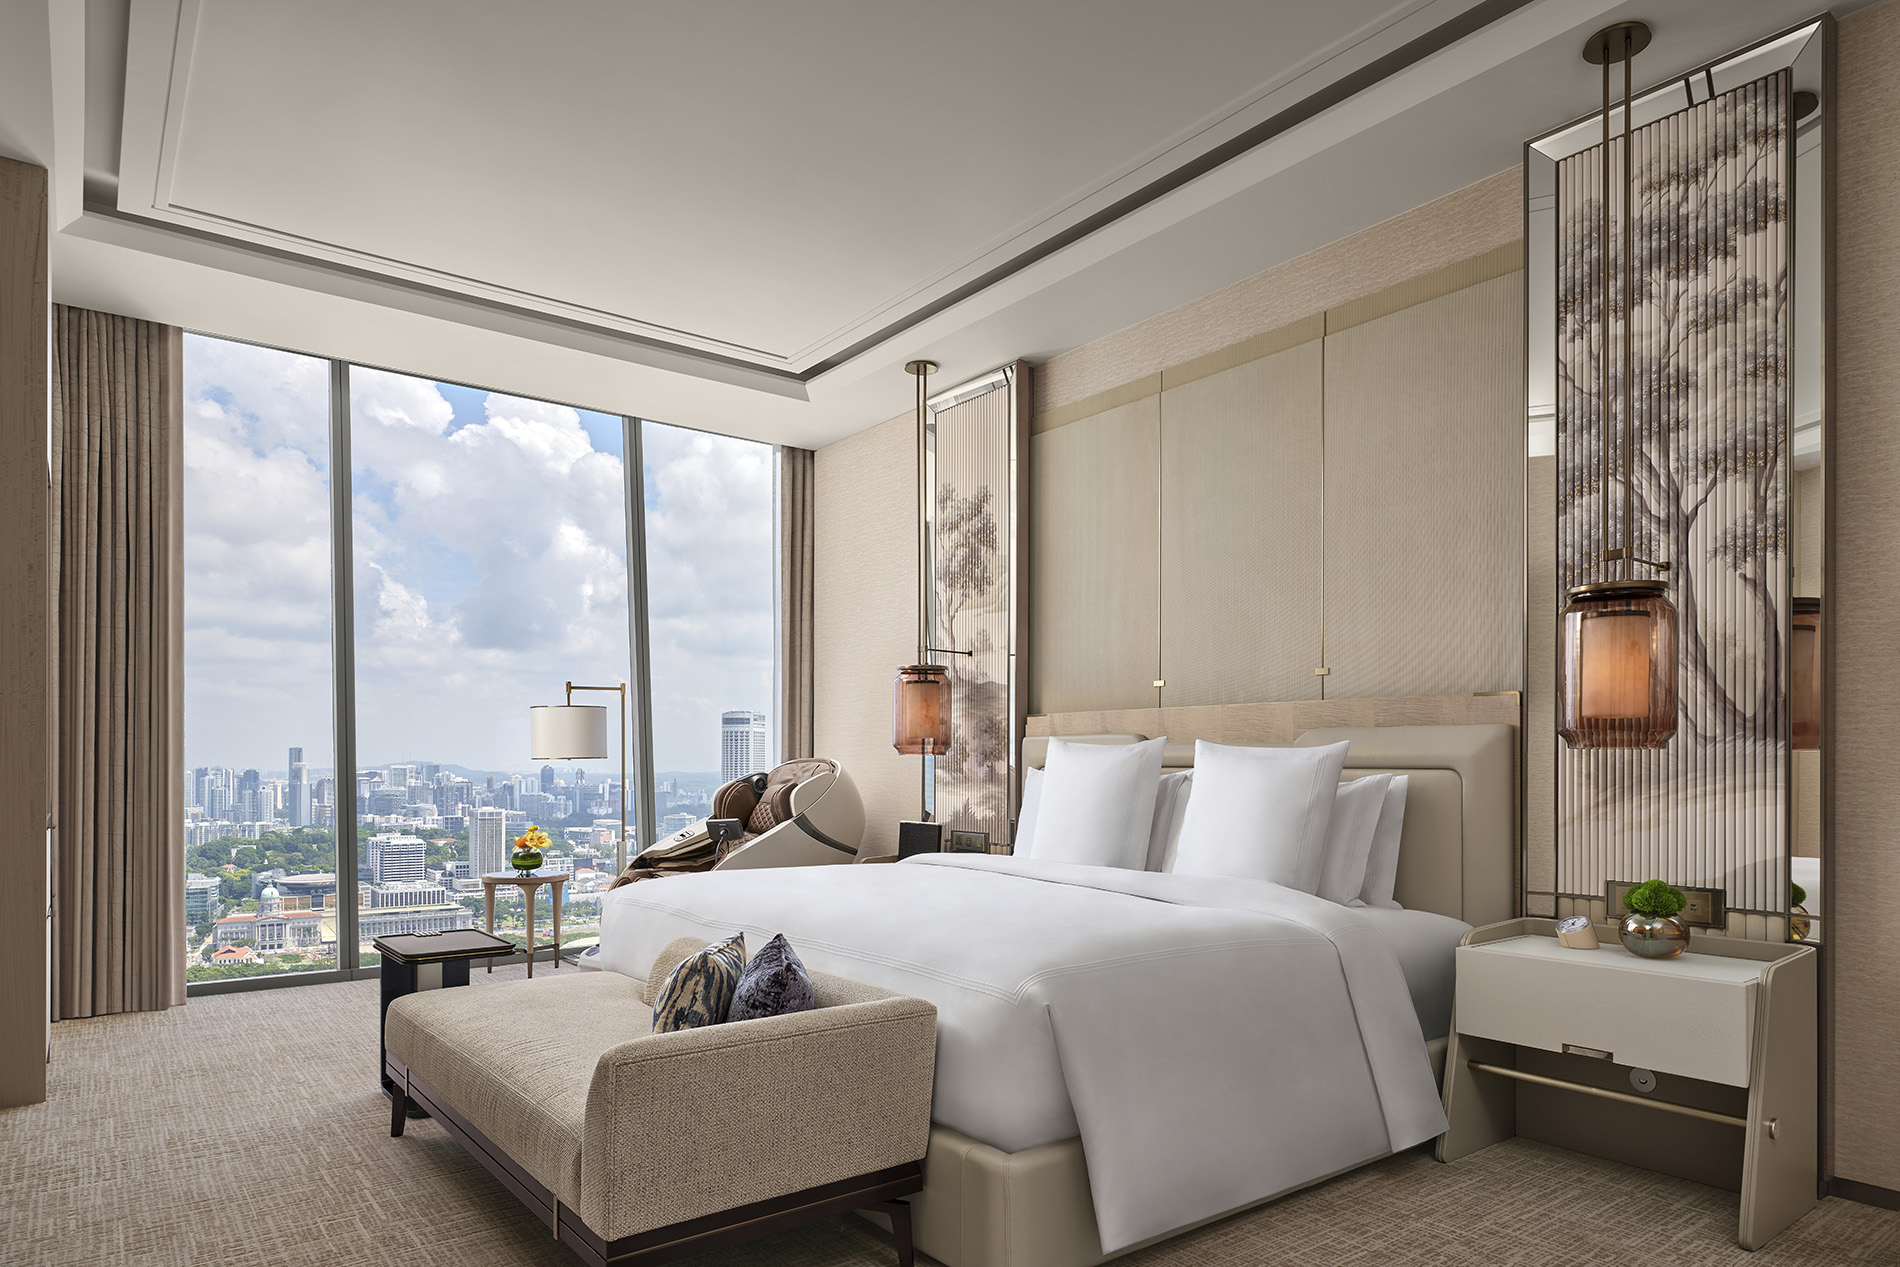 Presidential suite Marina Bay Sands